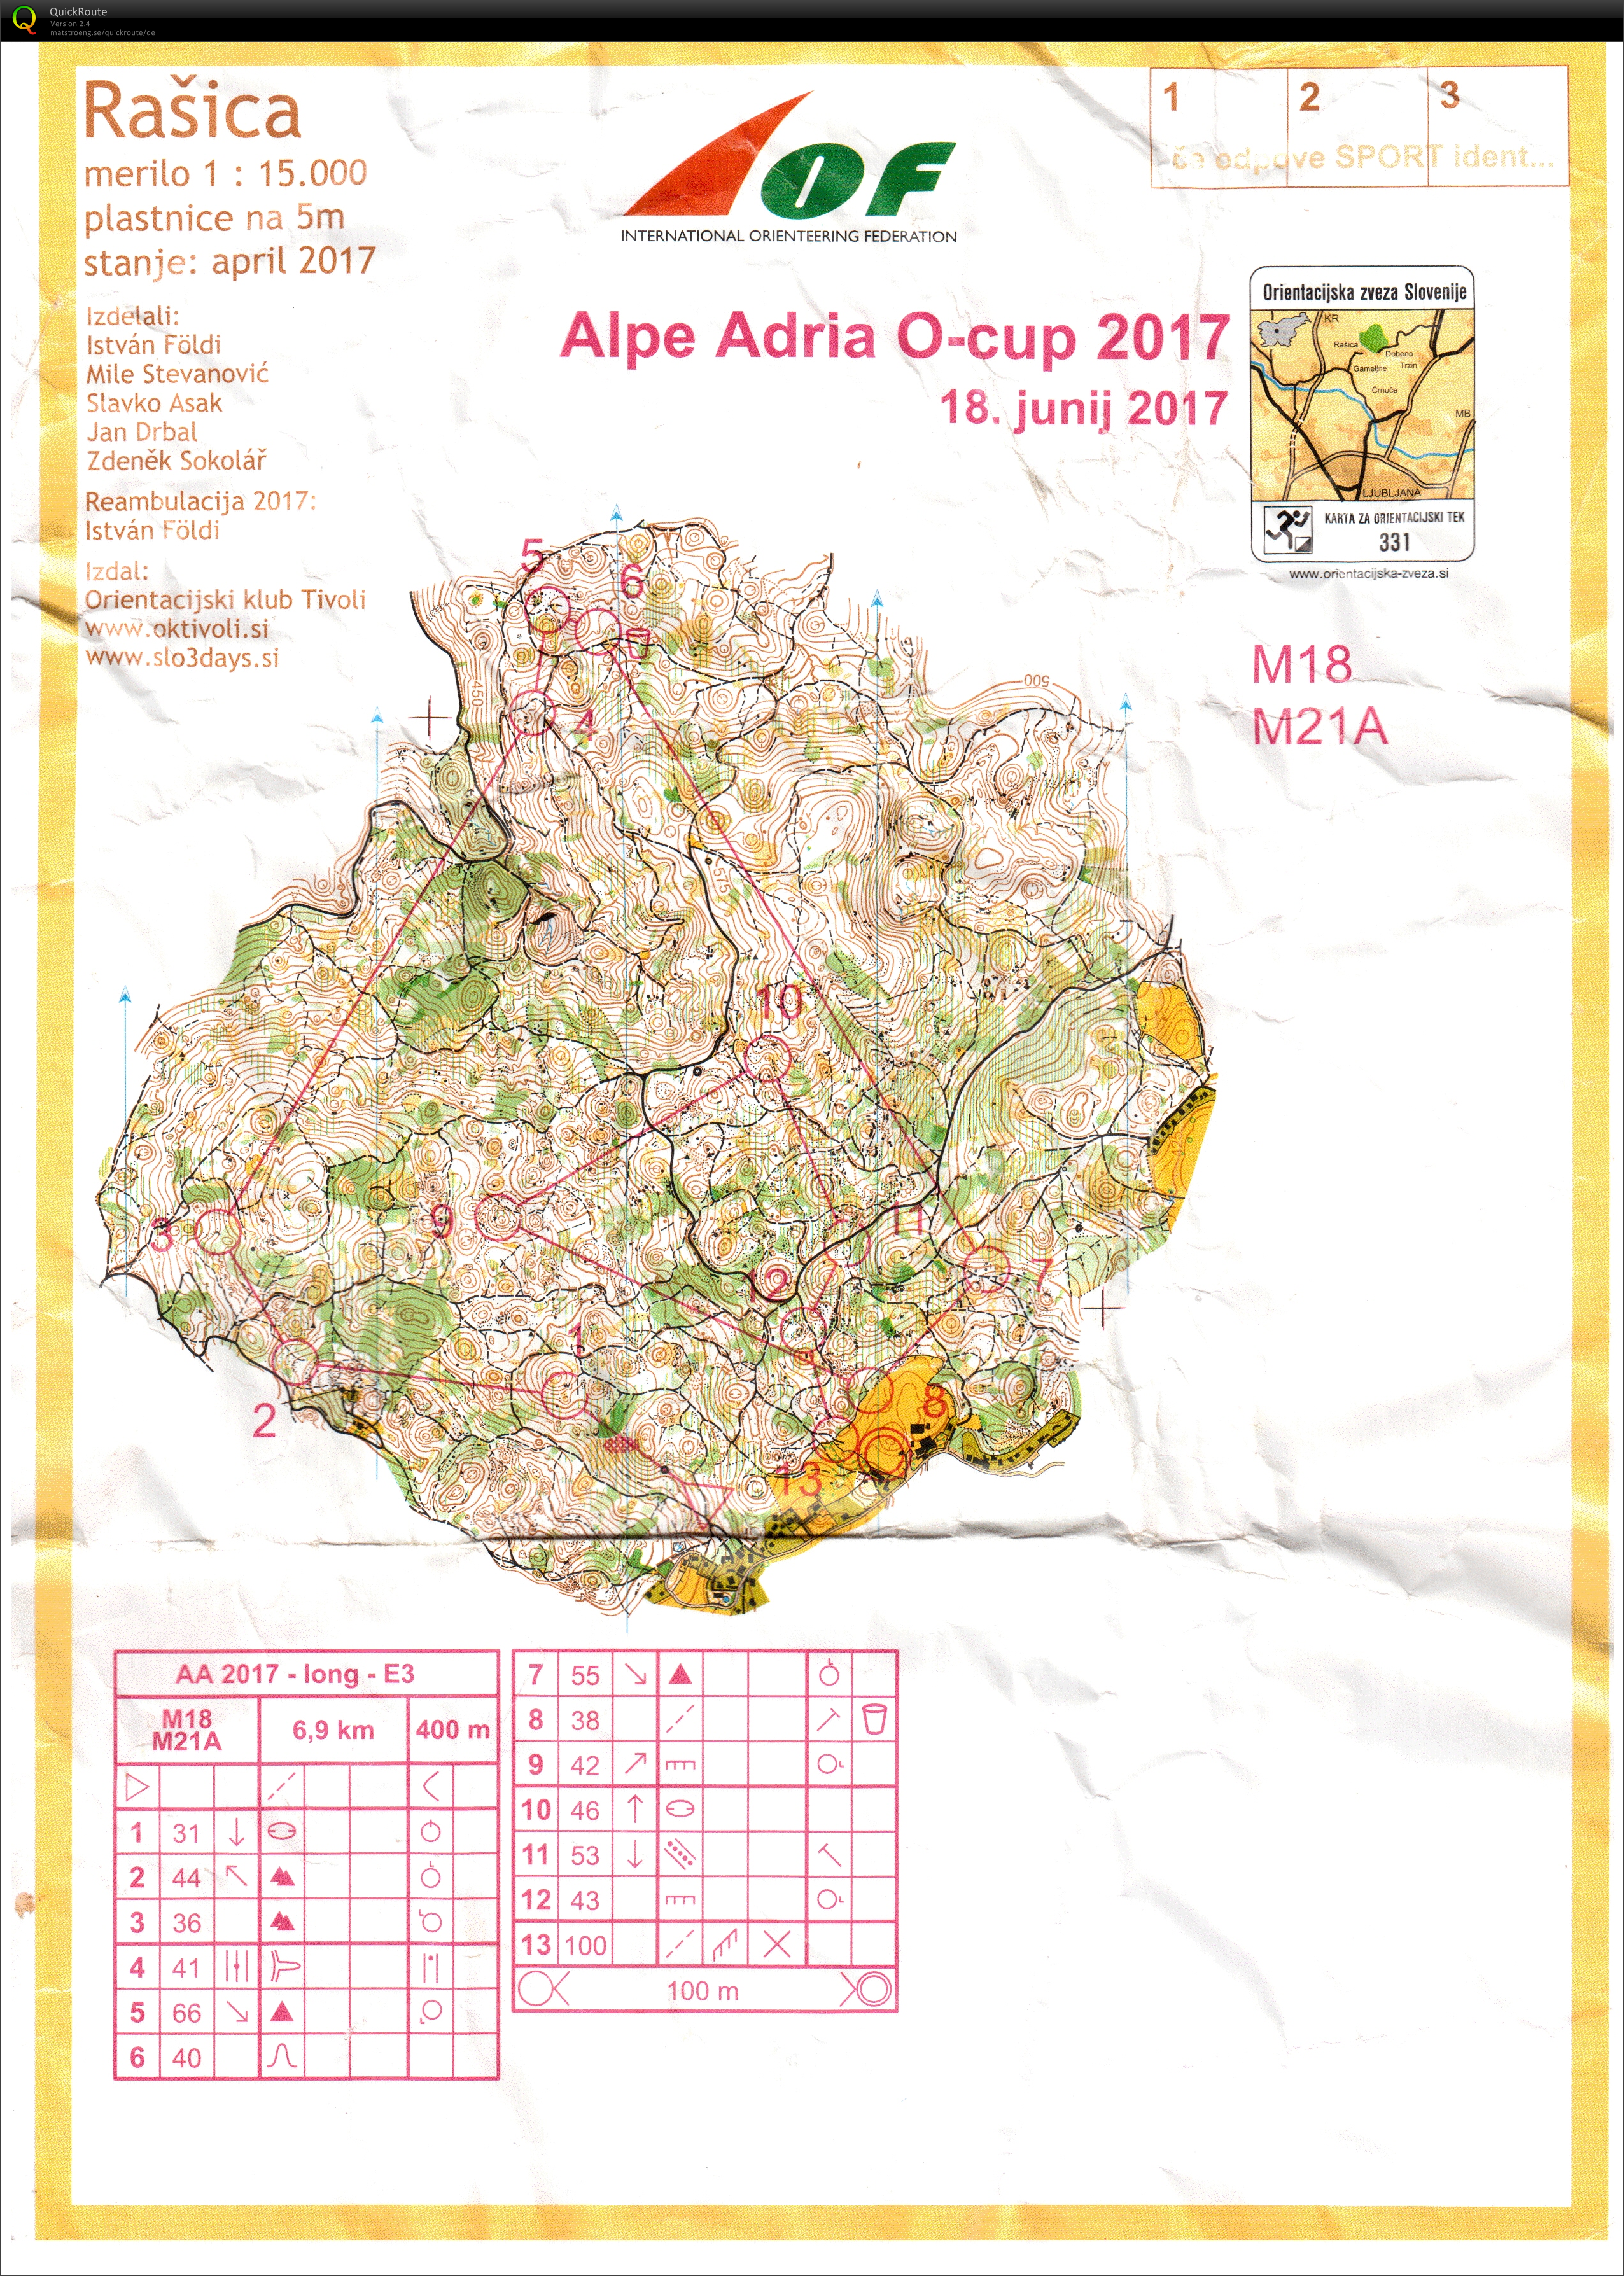 4. Austria Cup and Alpe Adria Cup (2017-06-18)